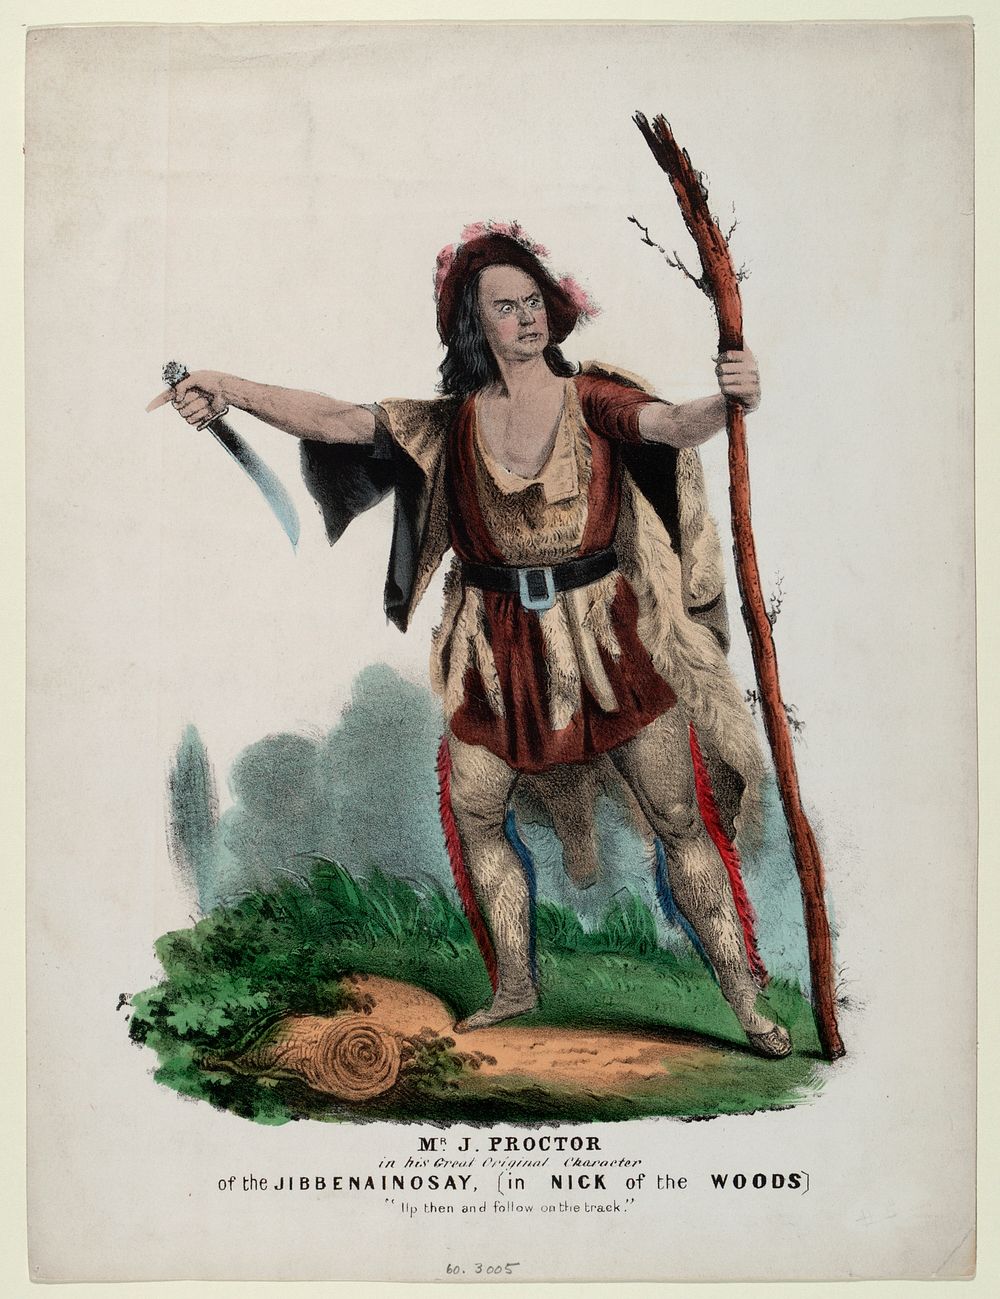 Mr. J. Proctor in his Great Original Character of the Jibbenainosay, in Nick of the Woods, Smithsonian National Museum of…